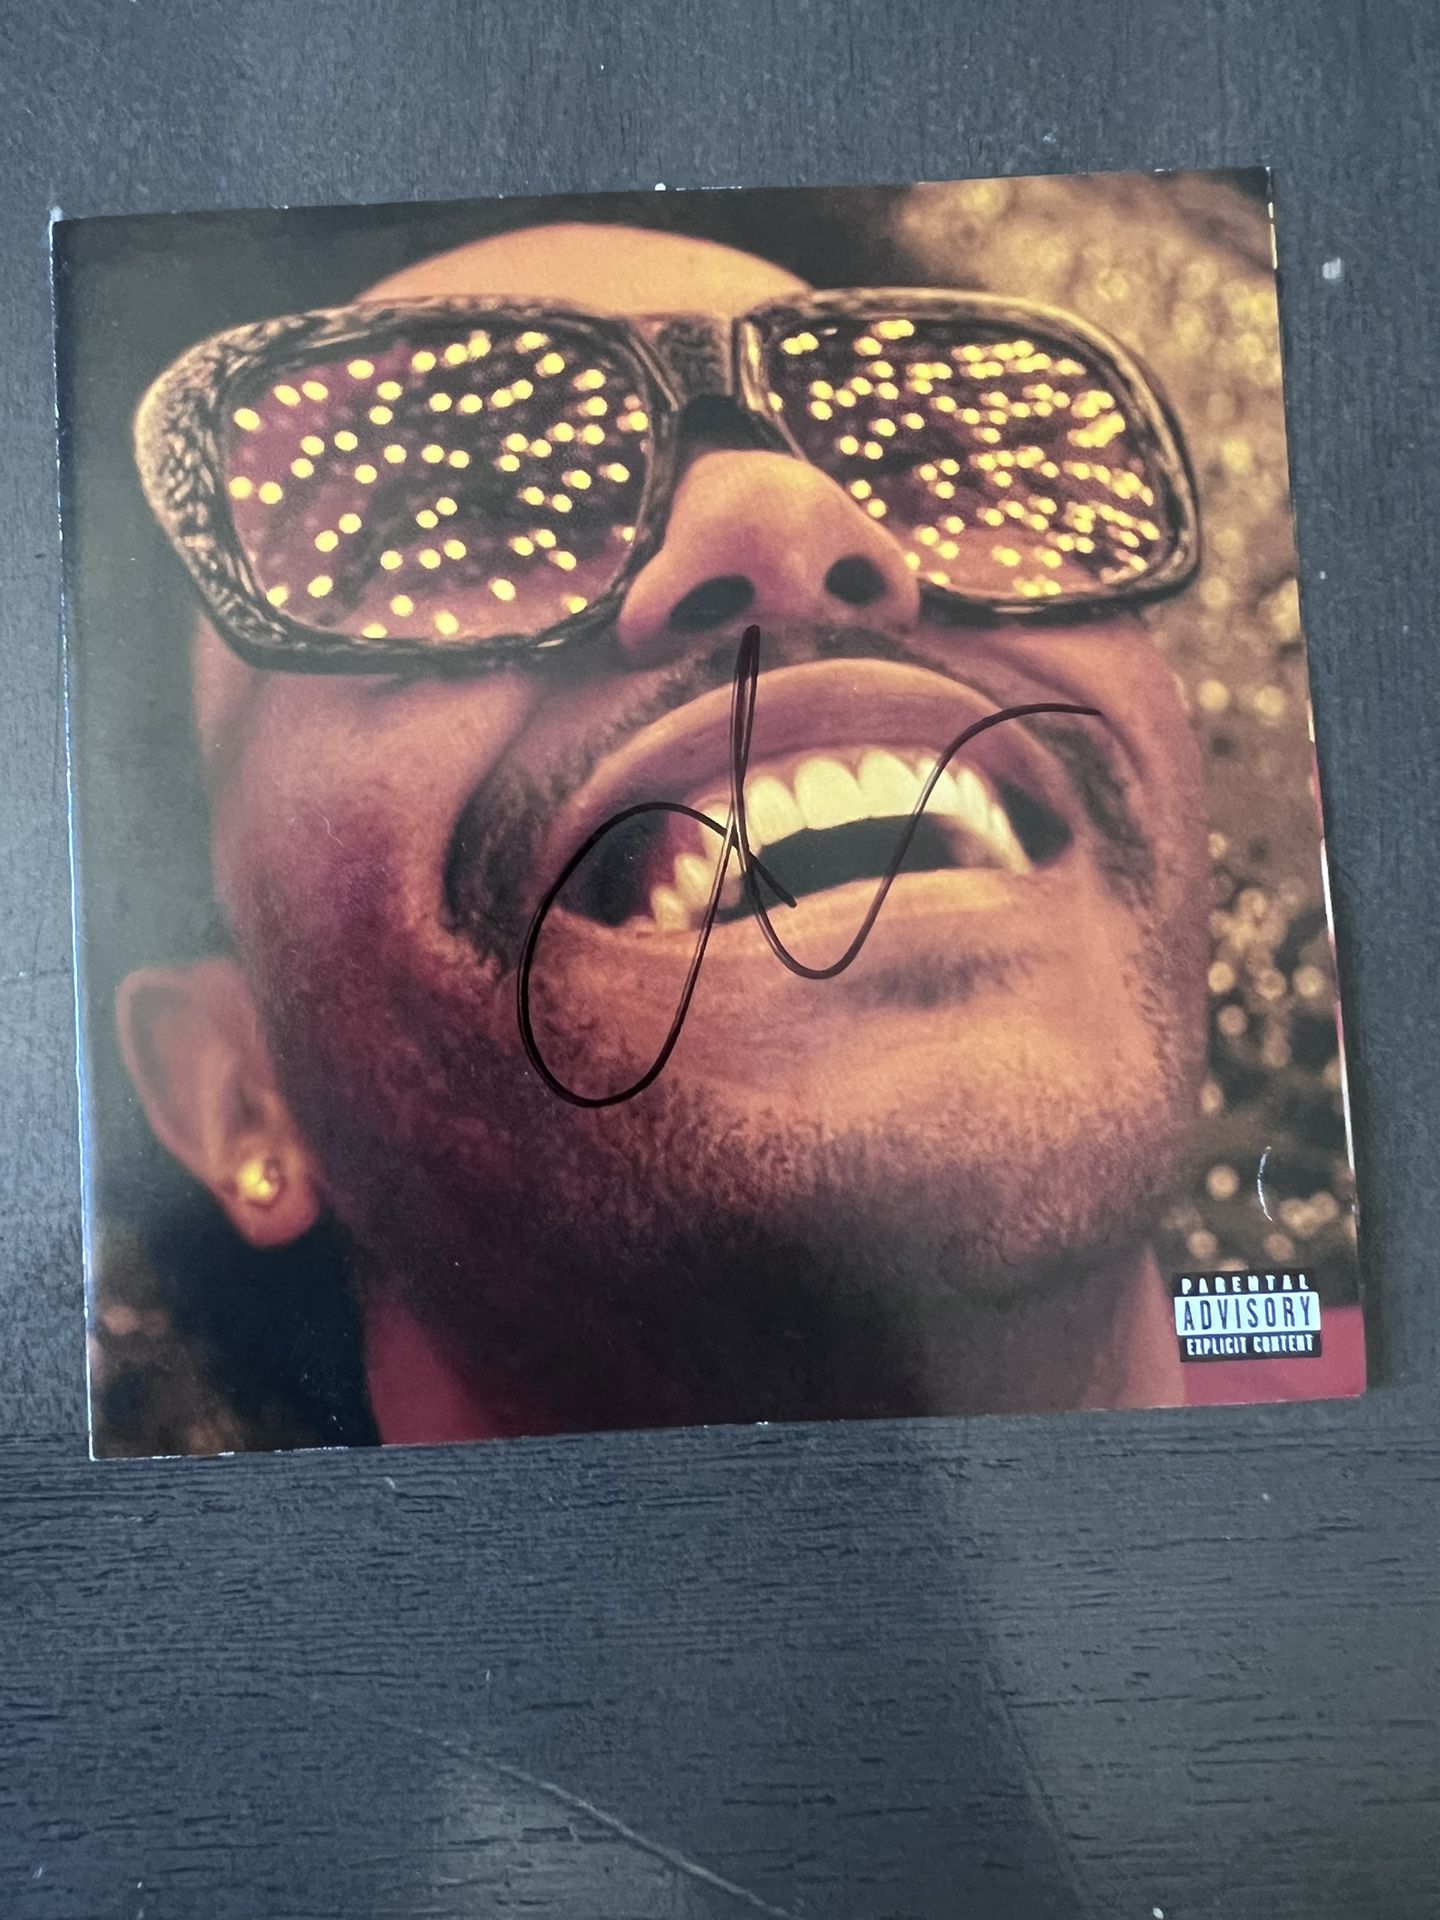 The Weeknd Signed Cd Booklet And Cd